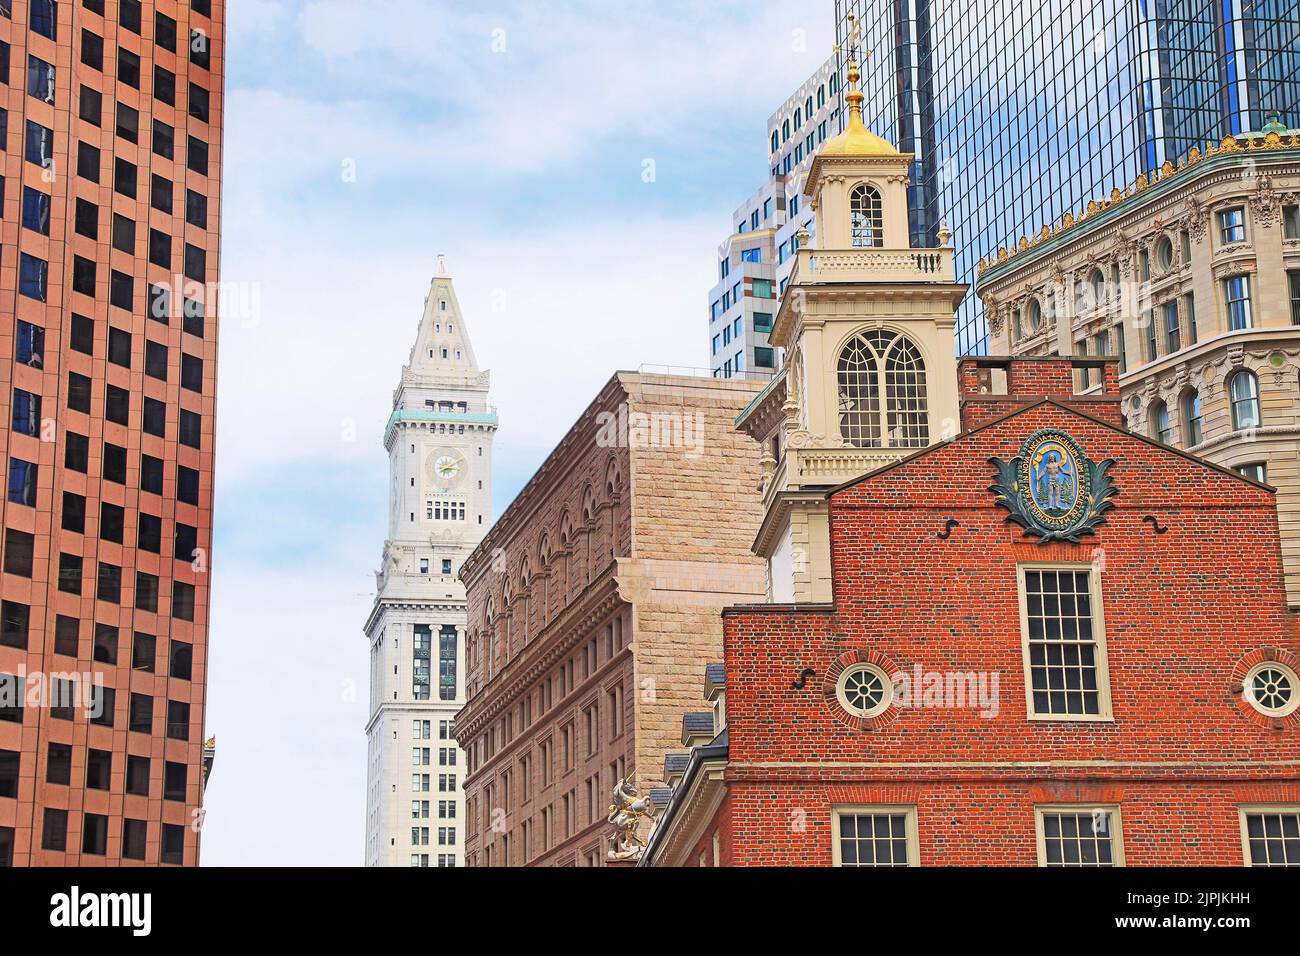 The Old State House of Boston surrounded by modern buildings, USA Stock Photo